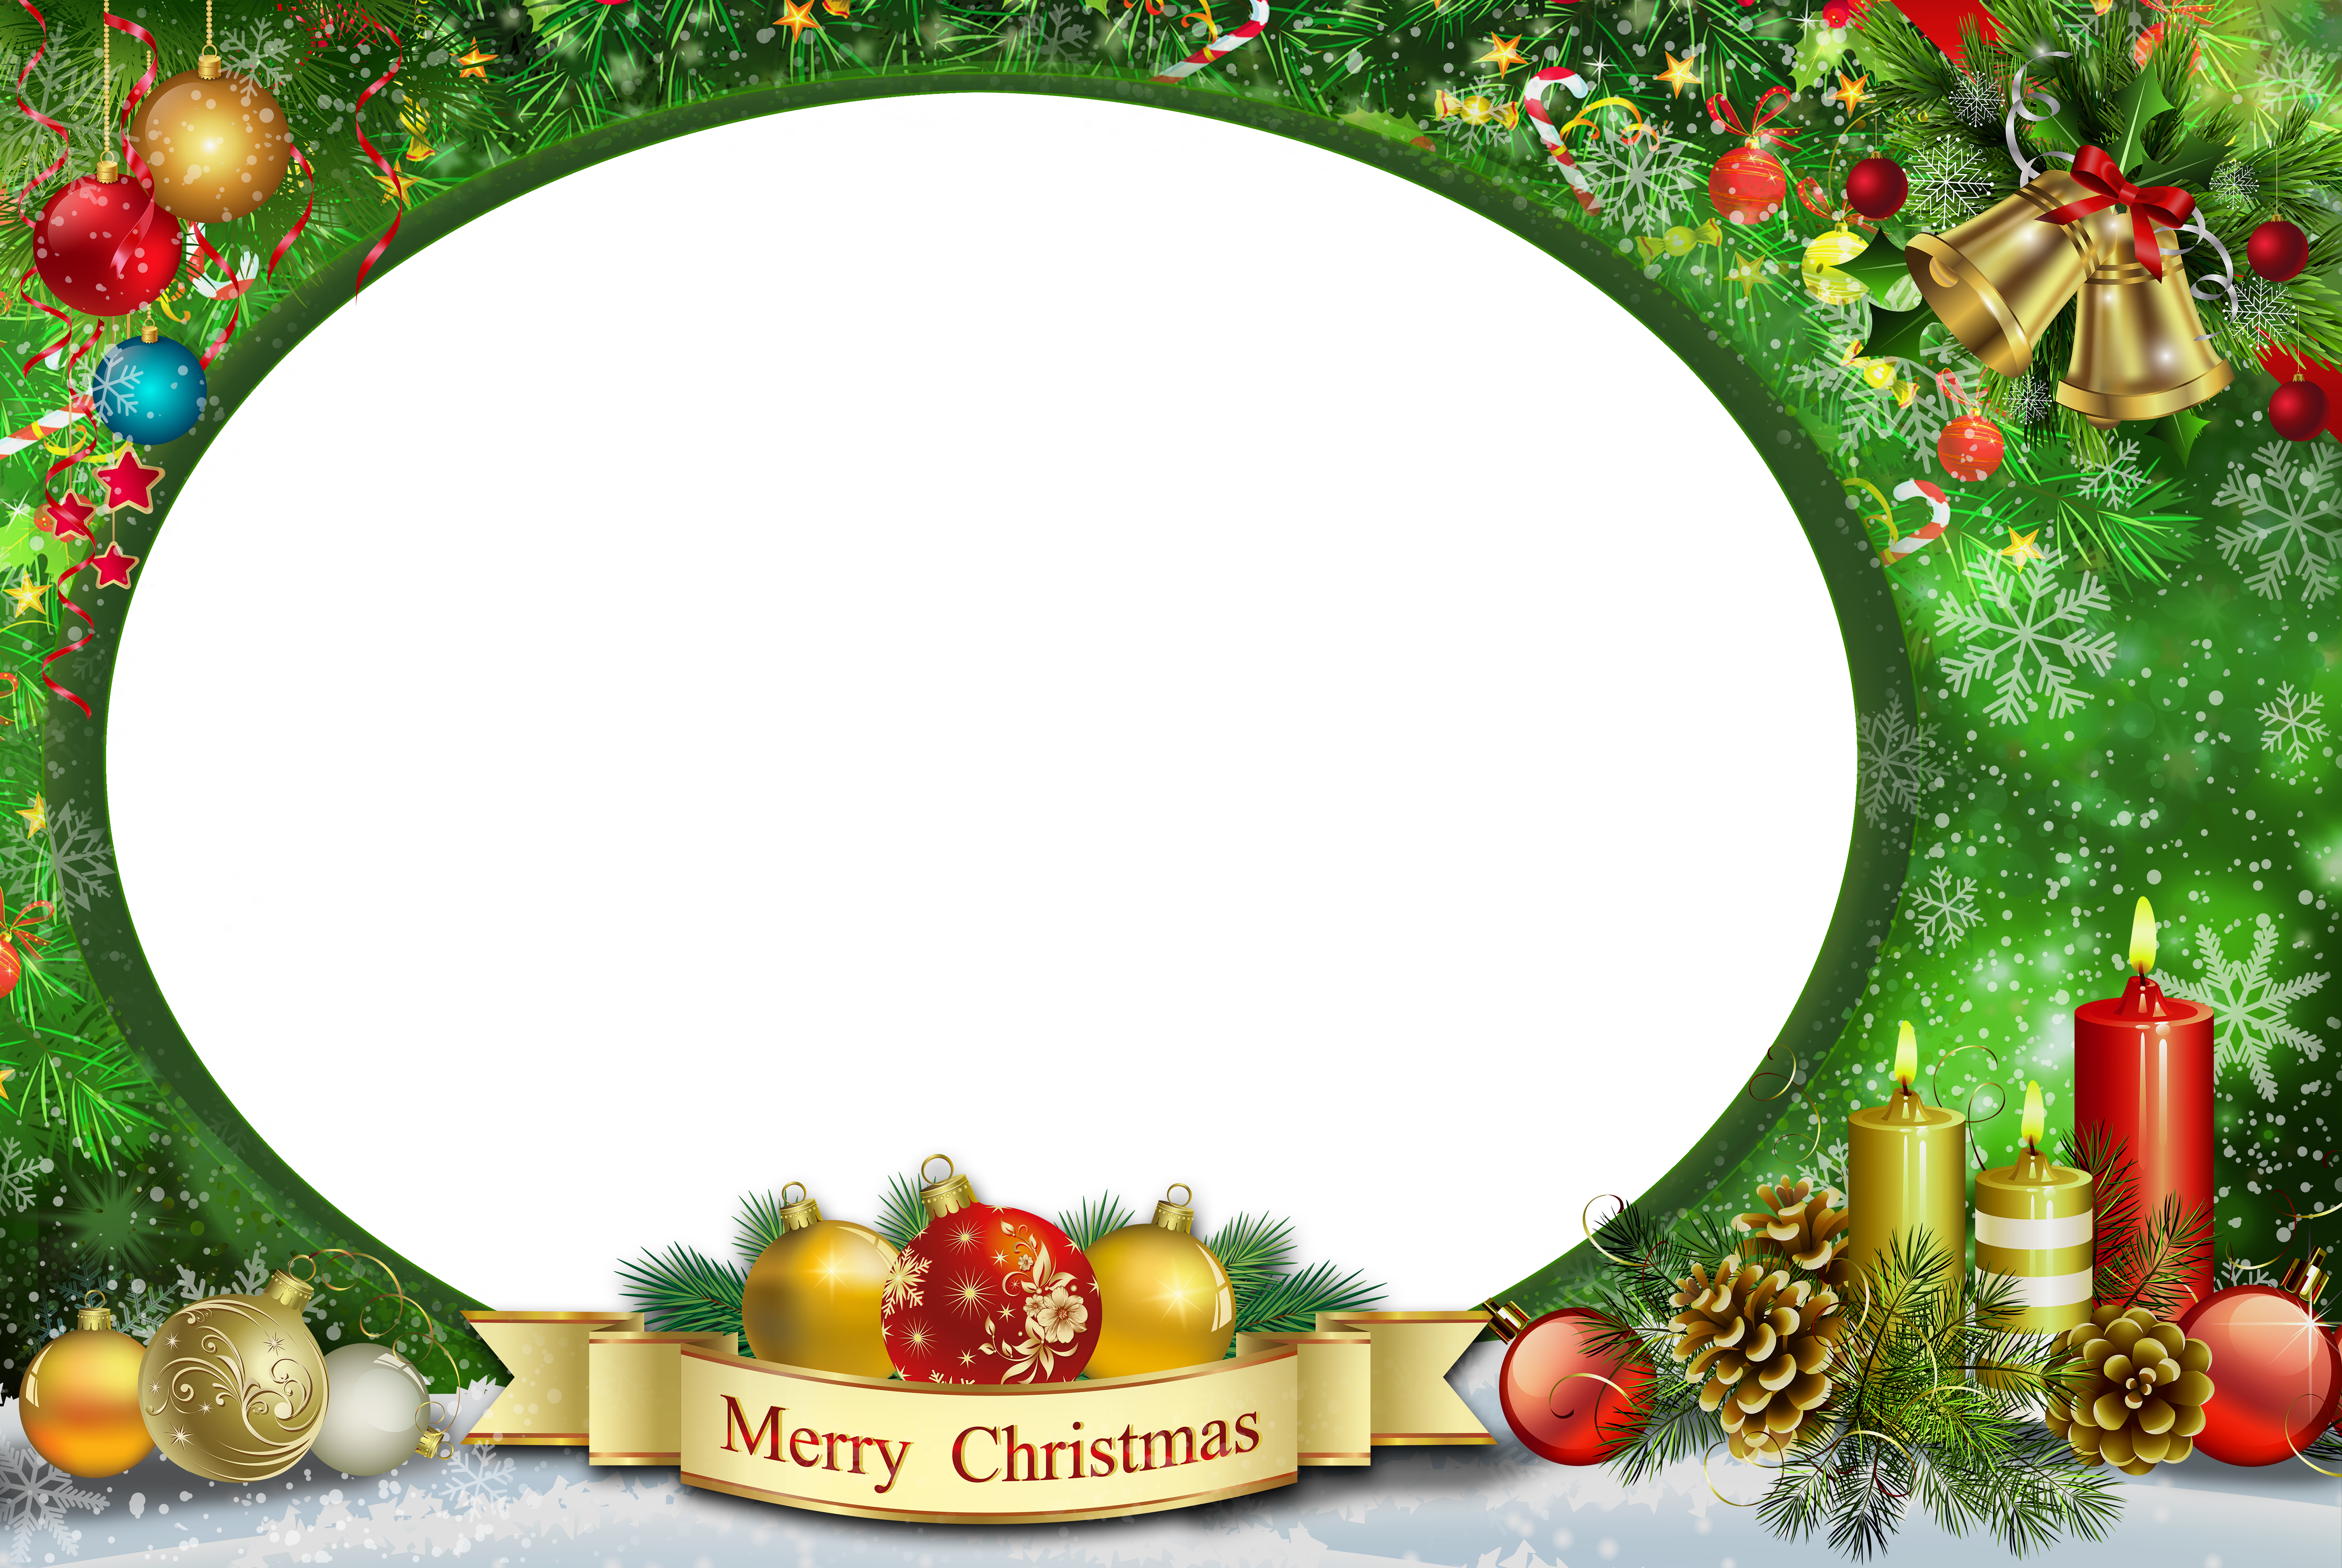 Transparent Christmas Frame Png Image Gallery Yopriceville High Quality Images And Transparent Png Free Clipart